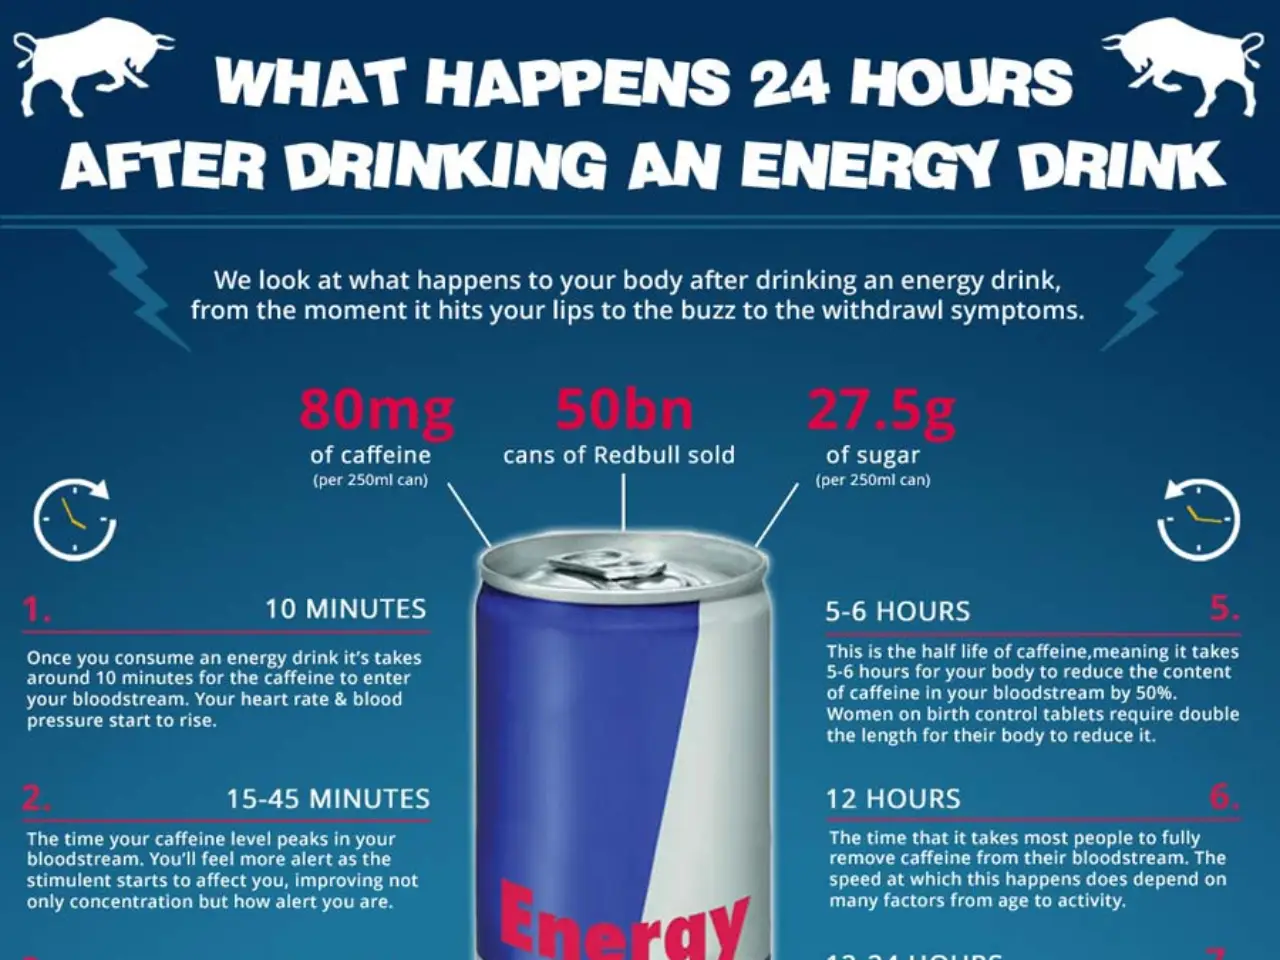 What Happens 24 Hours After Drinking an Energy Drink